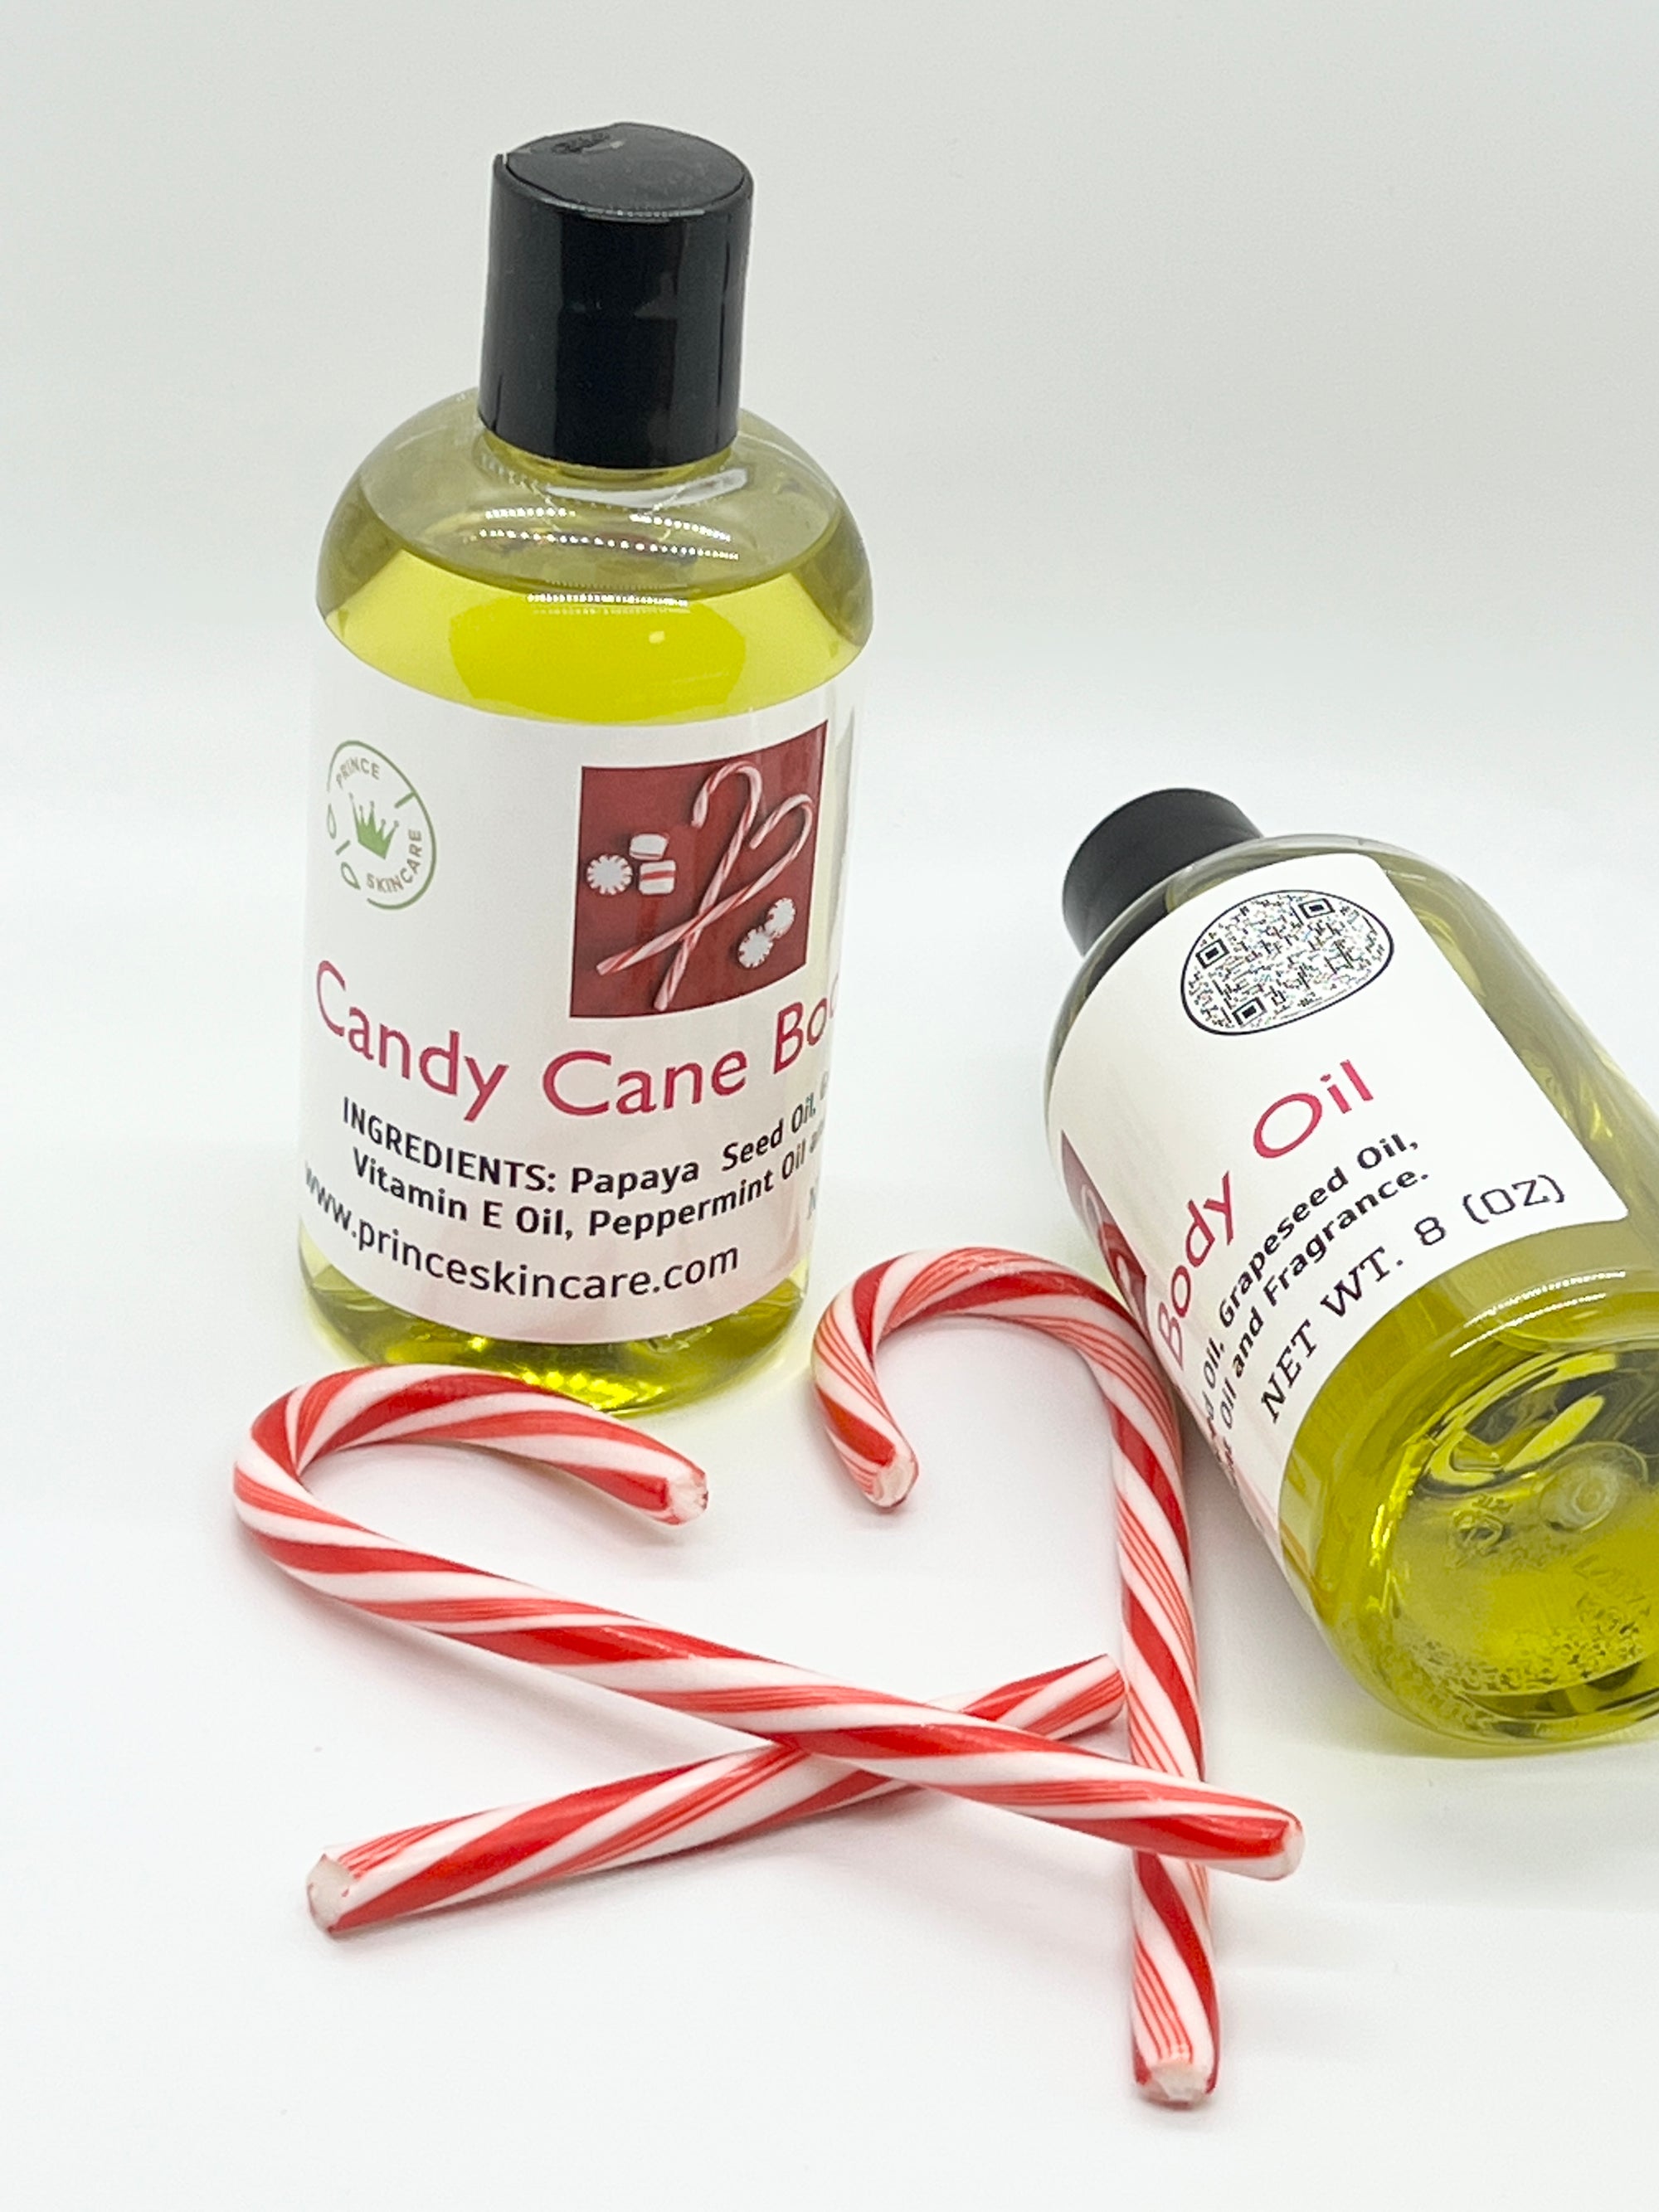 Candy Cane Body Oil